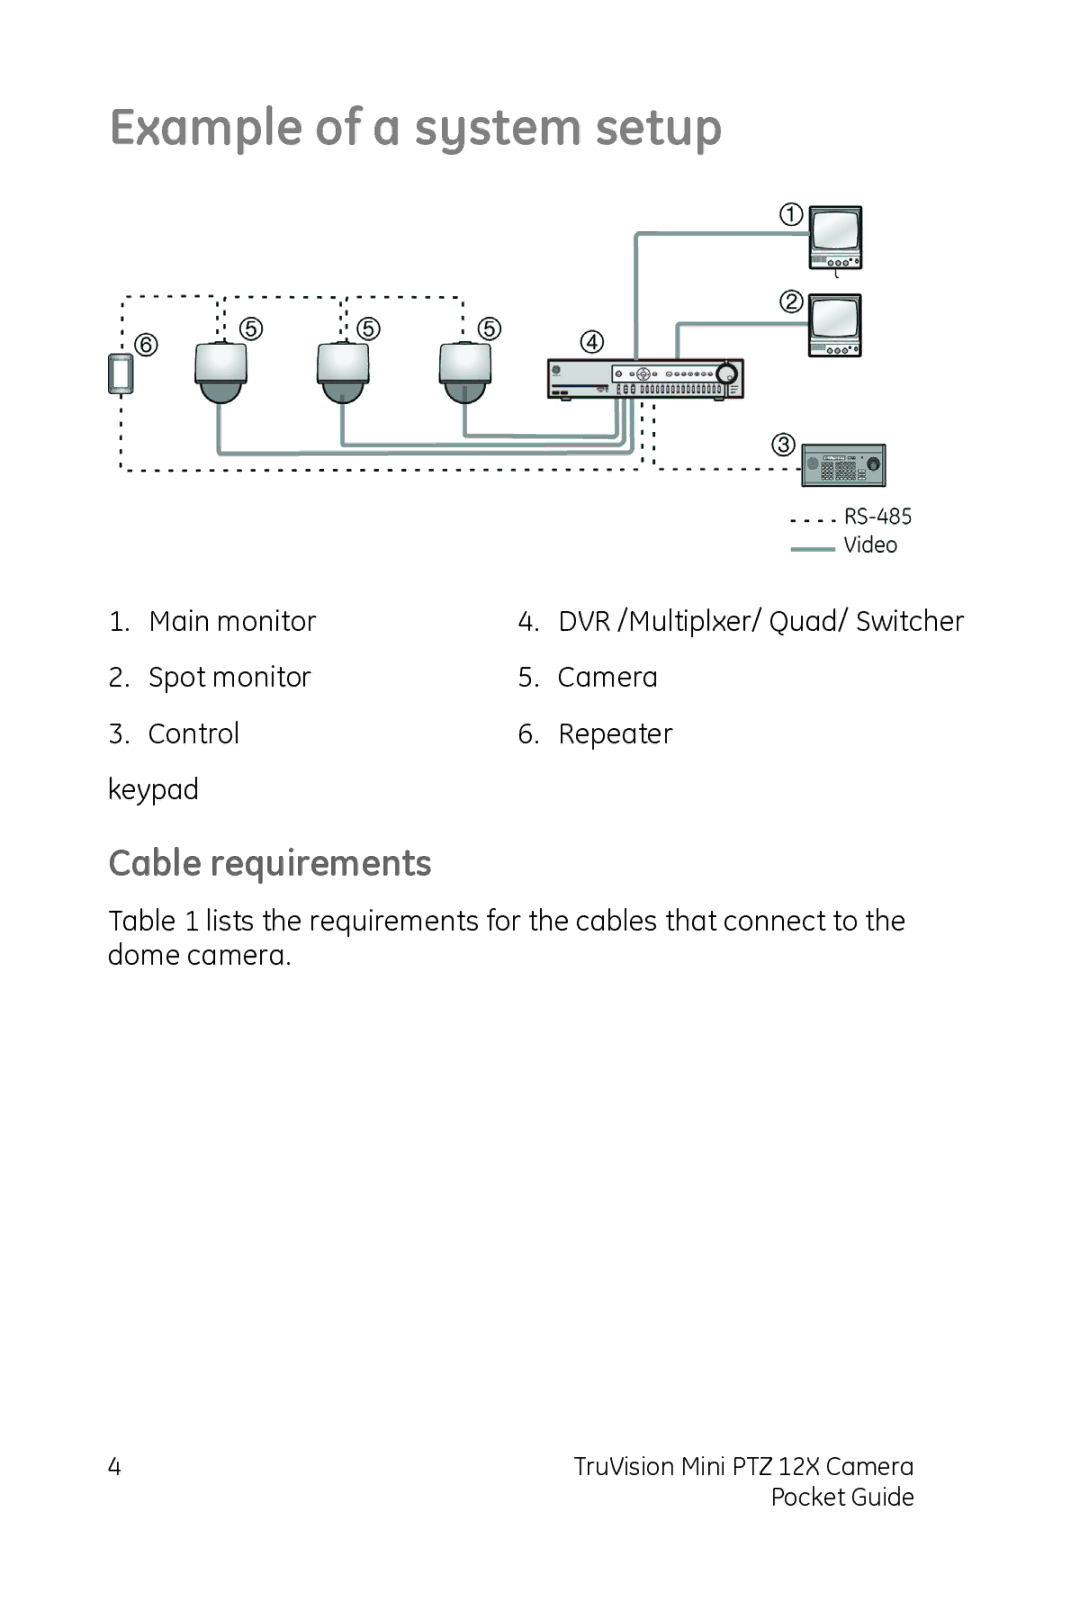 GE PTZ 12X manual Example of a system setup, Cable requirements 